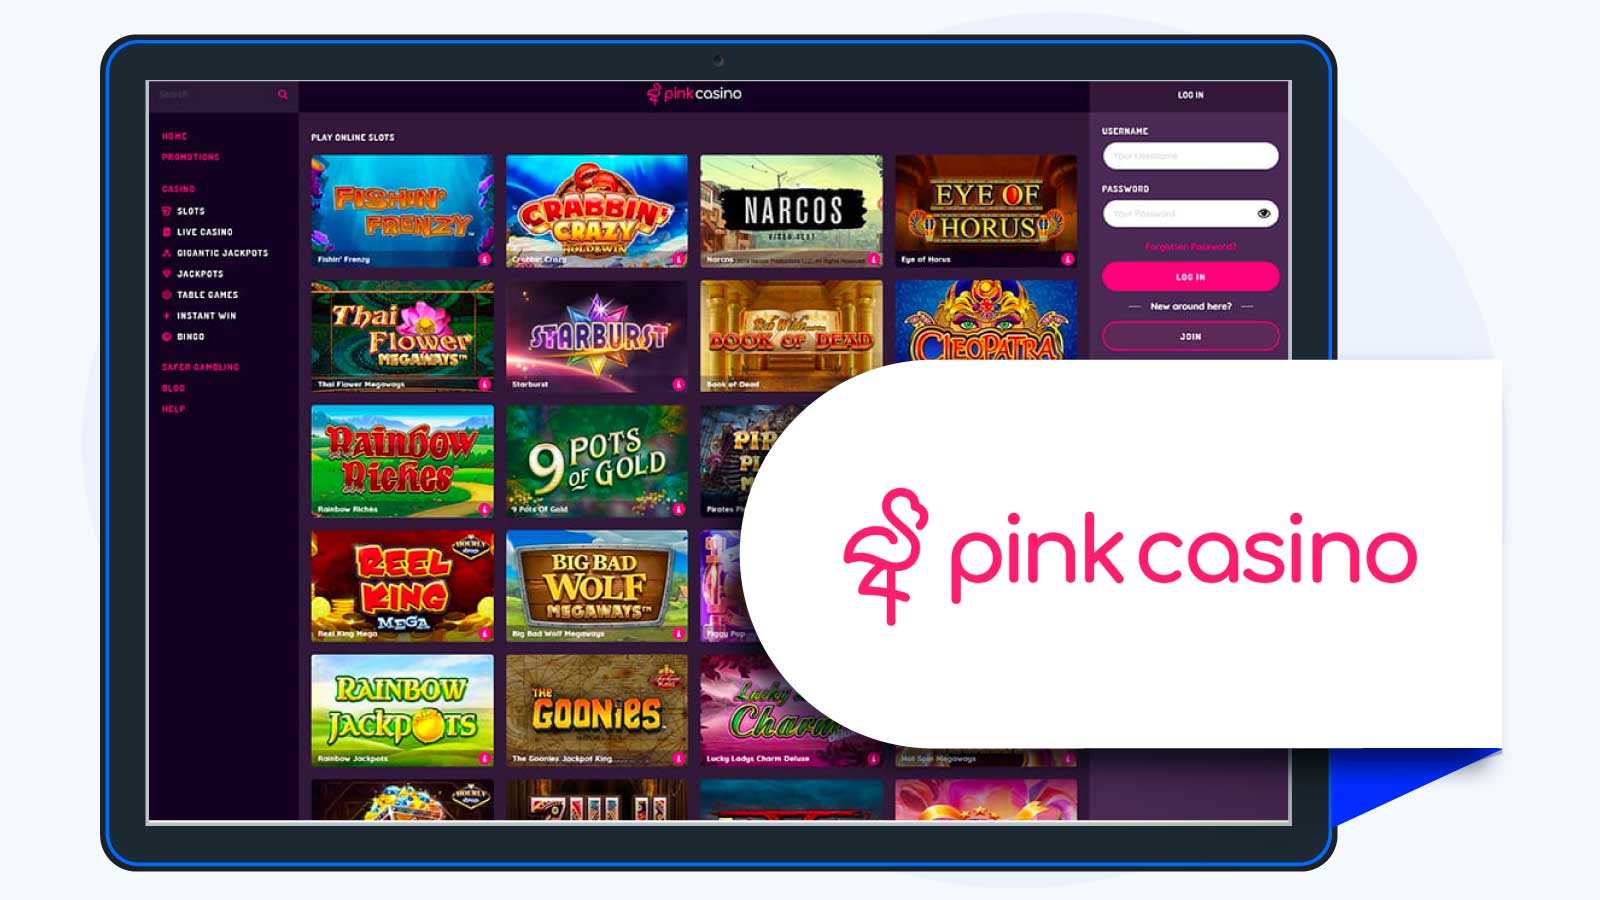 Pink Casino – Best for Payment Alternatives